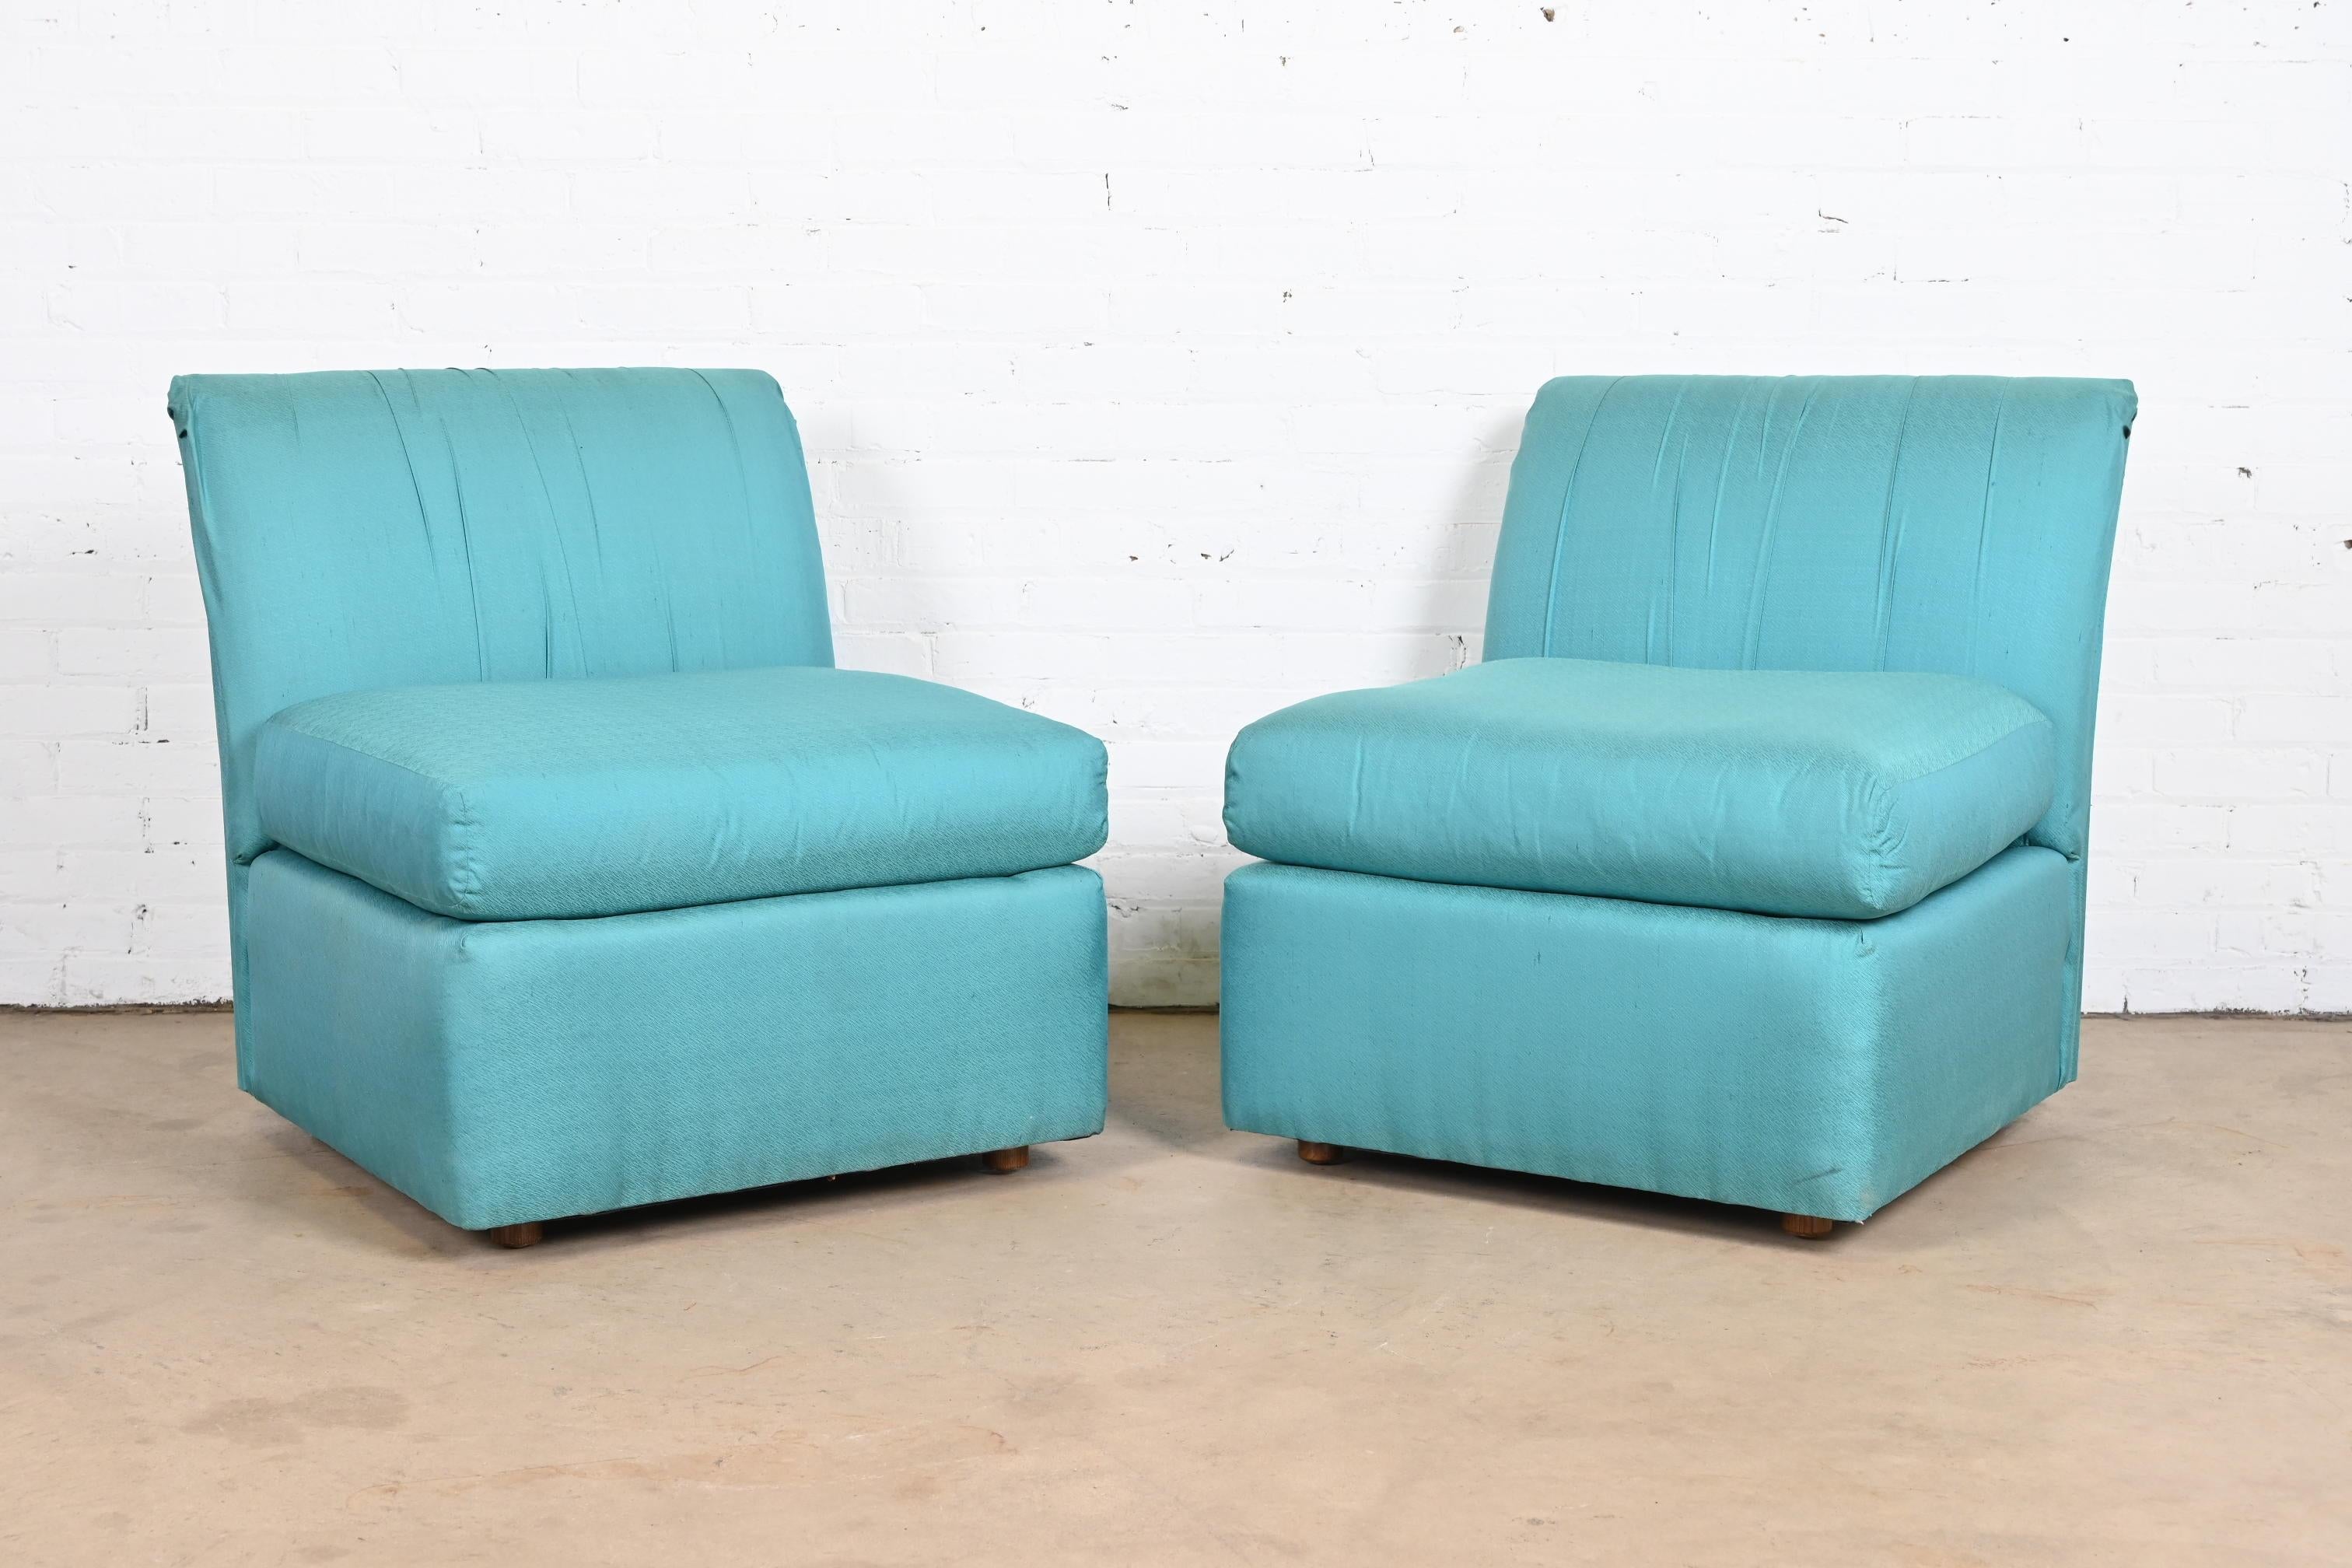 A stunning pair of Modern armless silk slipper chairs or lounge chairs with original turquoise silk upholstery.

By Baker Furniture.

USA, circa 1970s.

Measures: 28